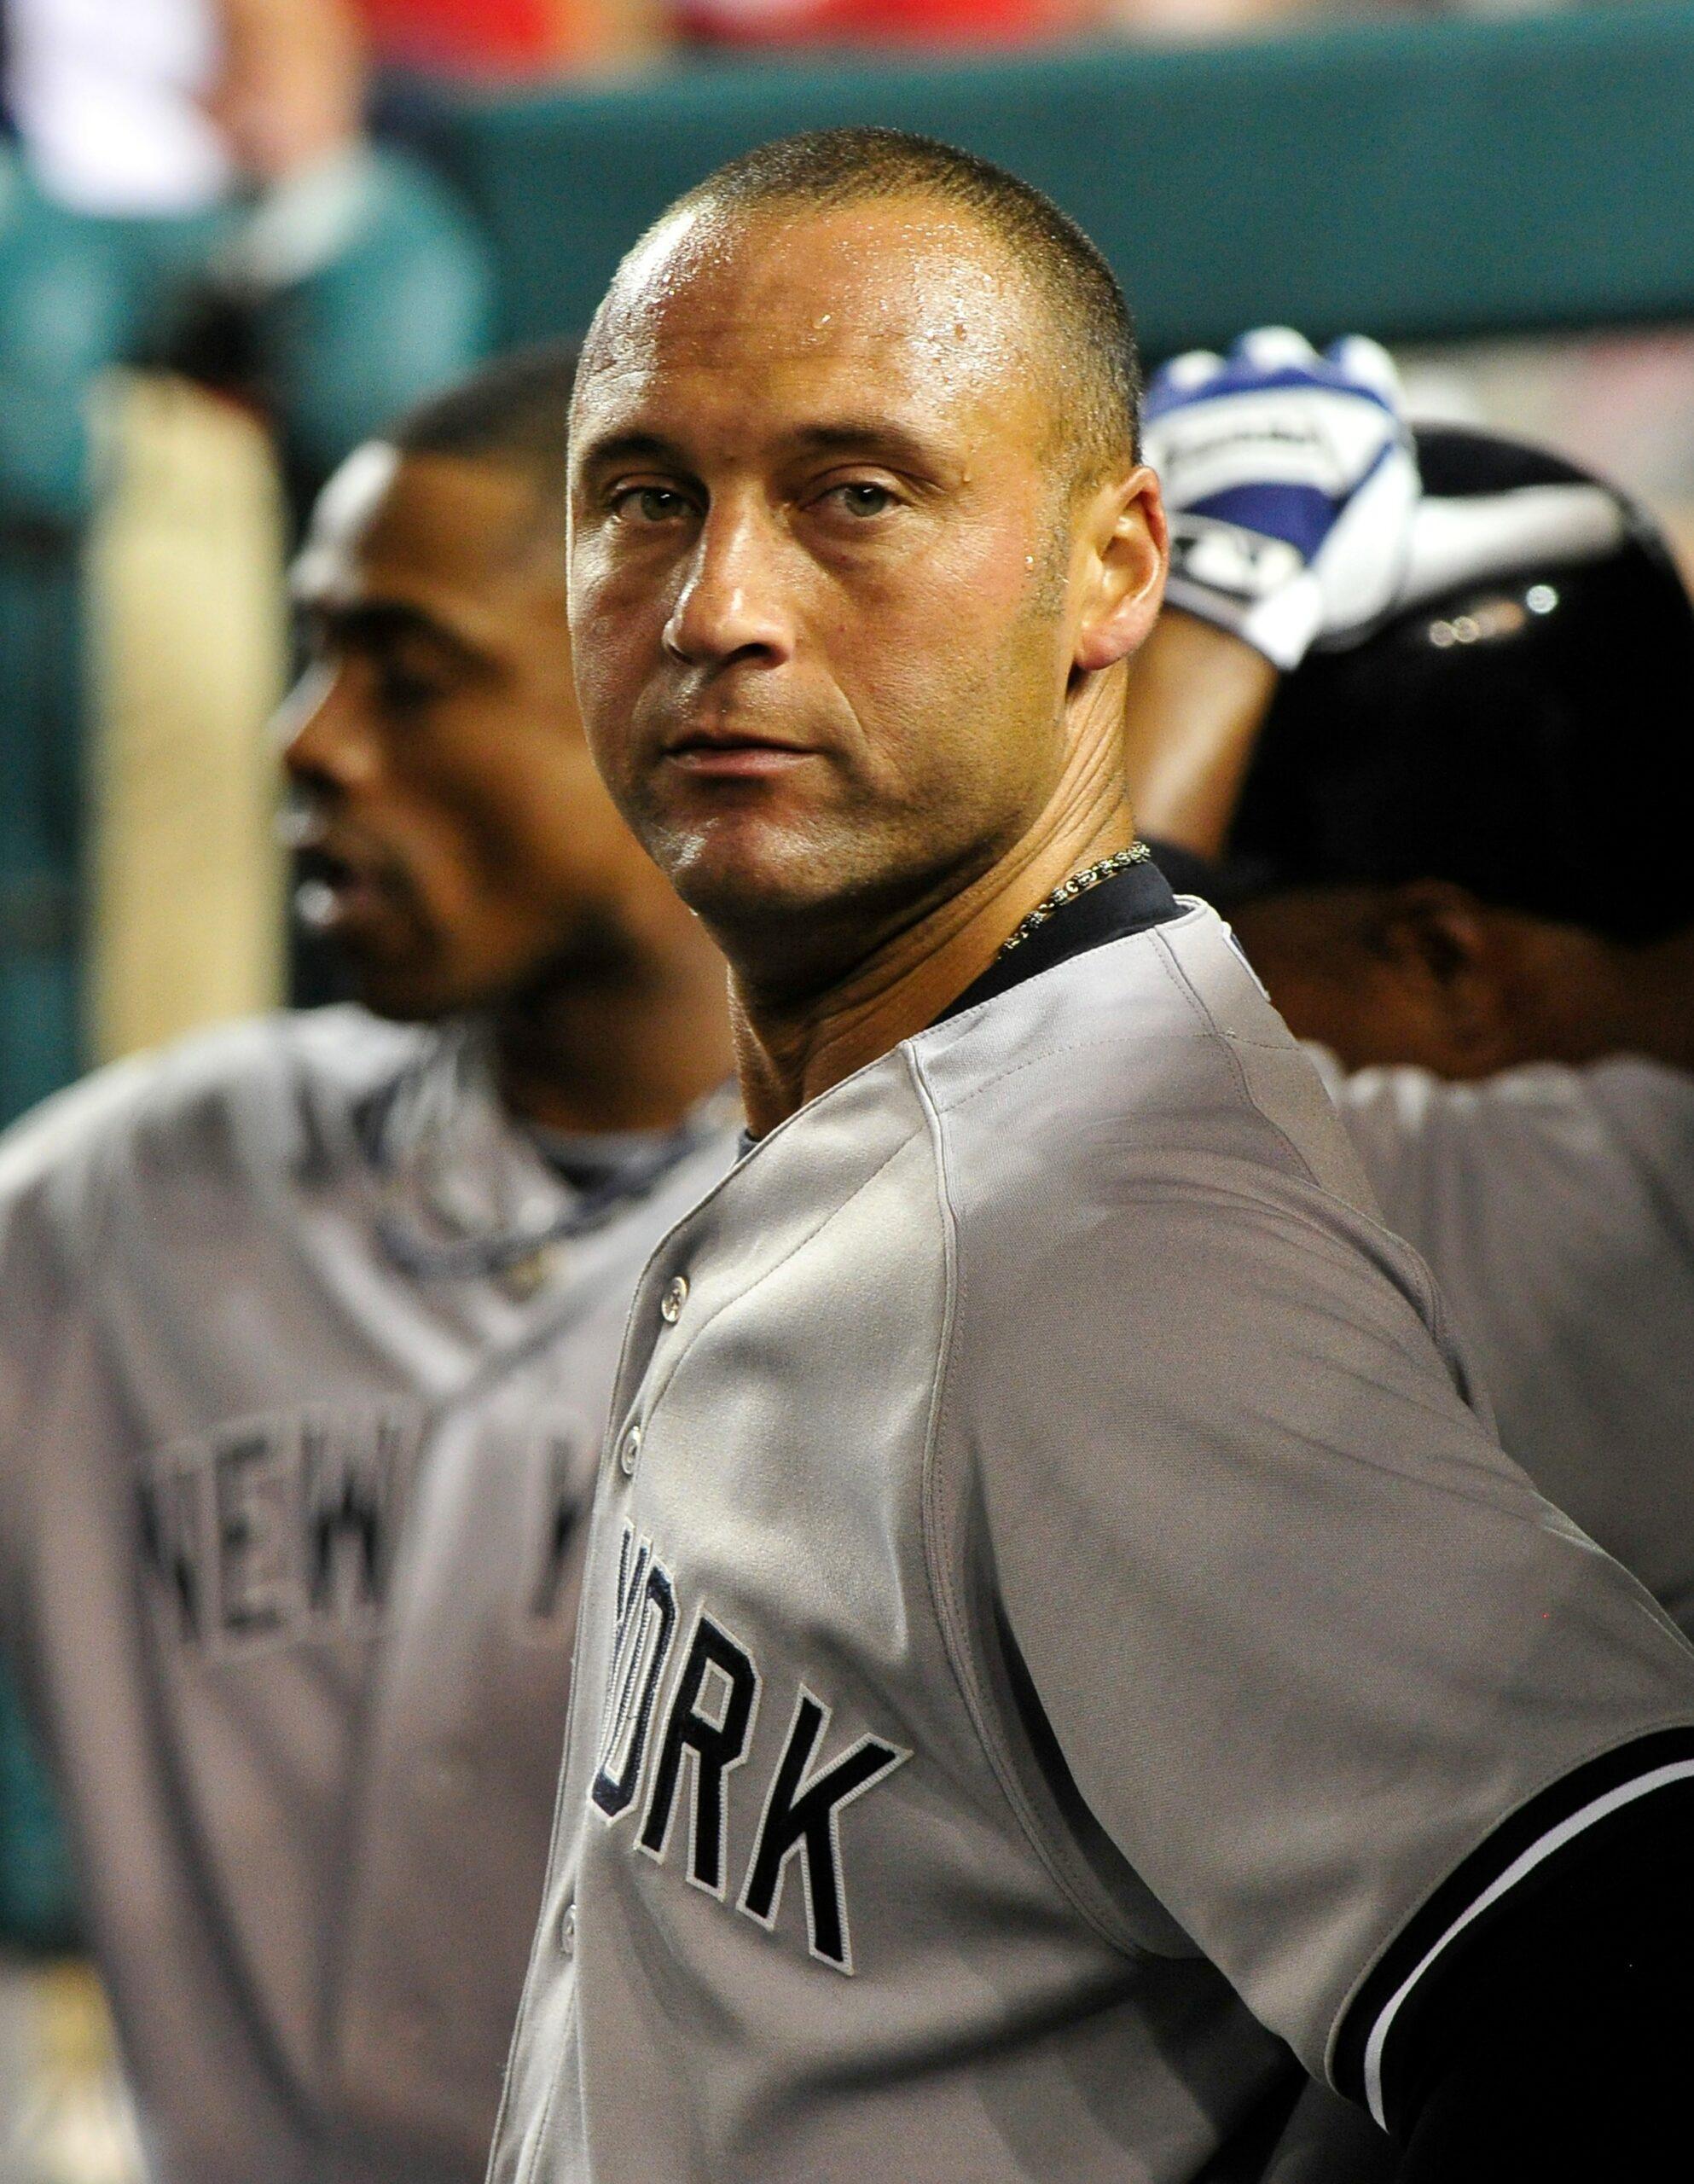 Archive photos of New York Yankees baseball player Derek Jeter in action against the Washington Nationals in Washington, District of Columbia, USA. 